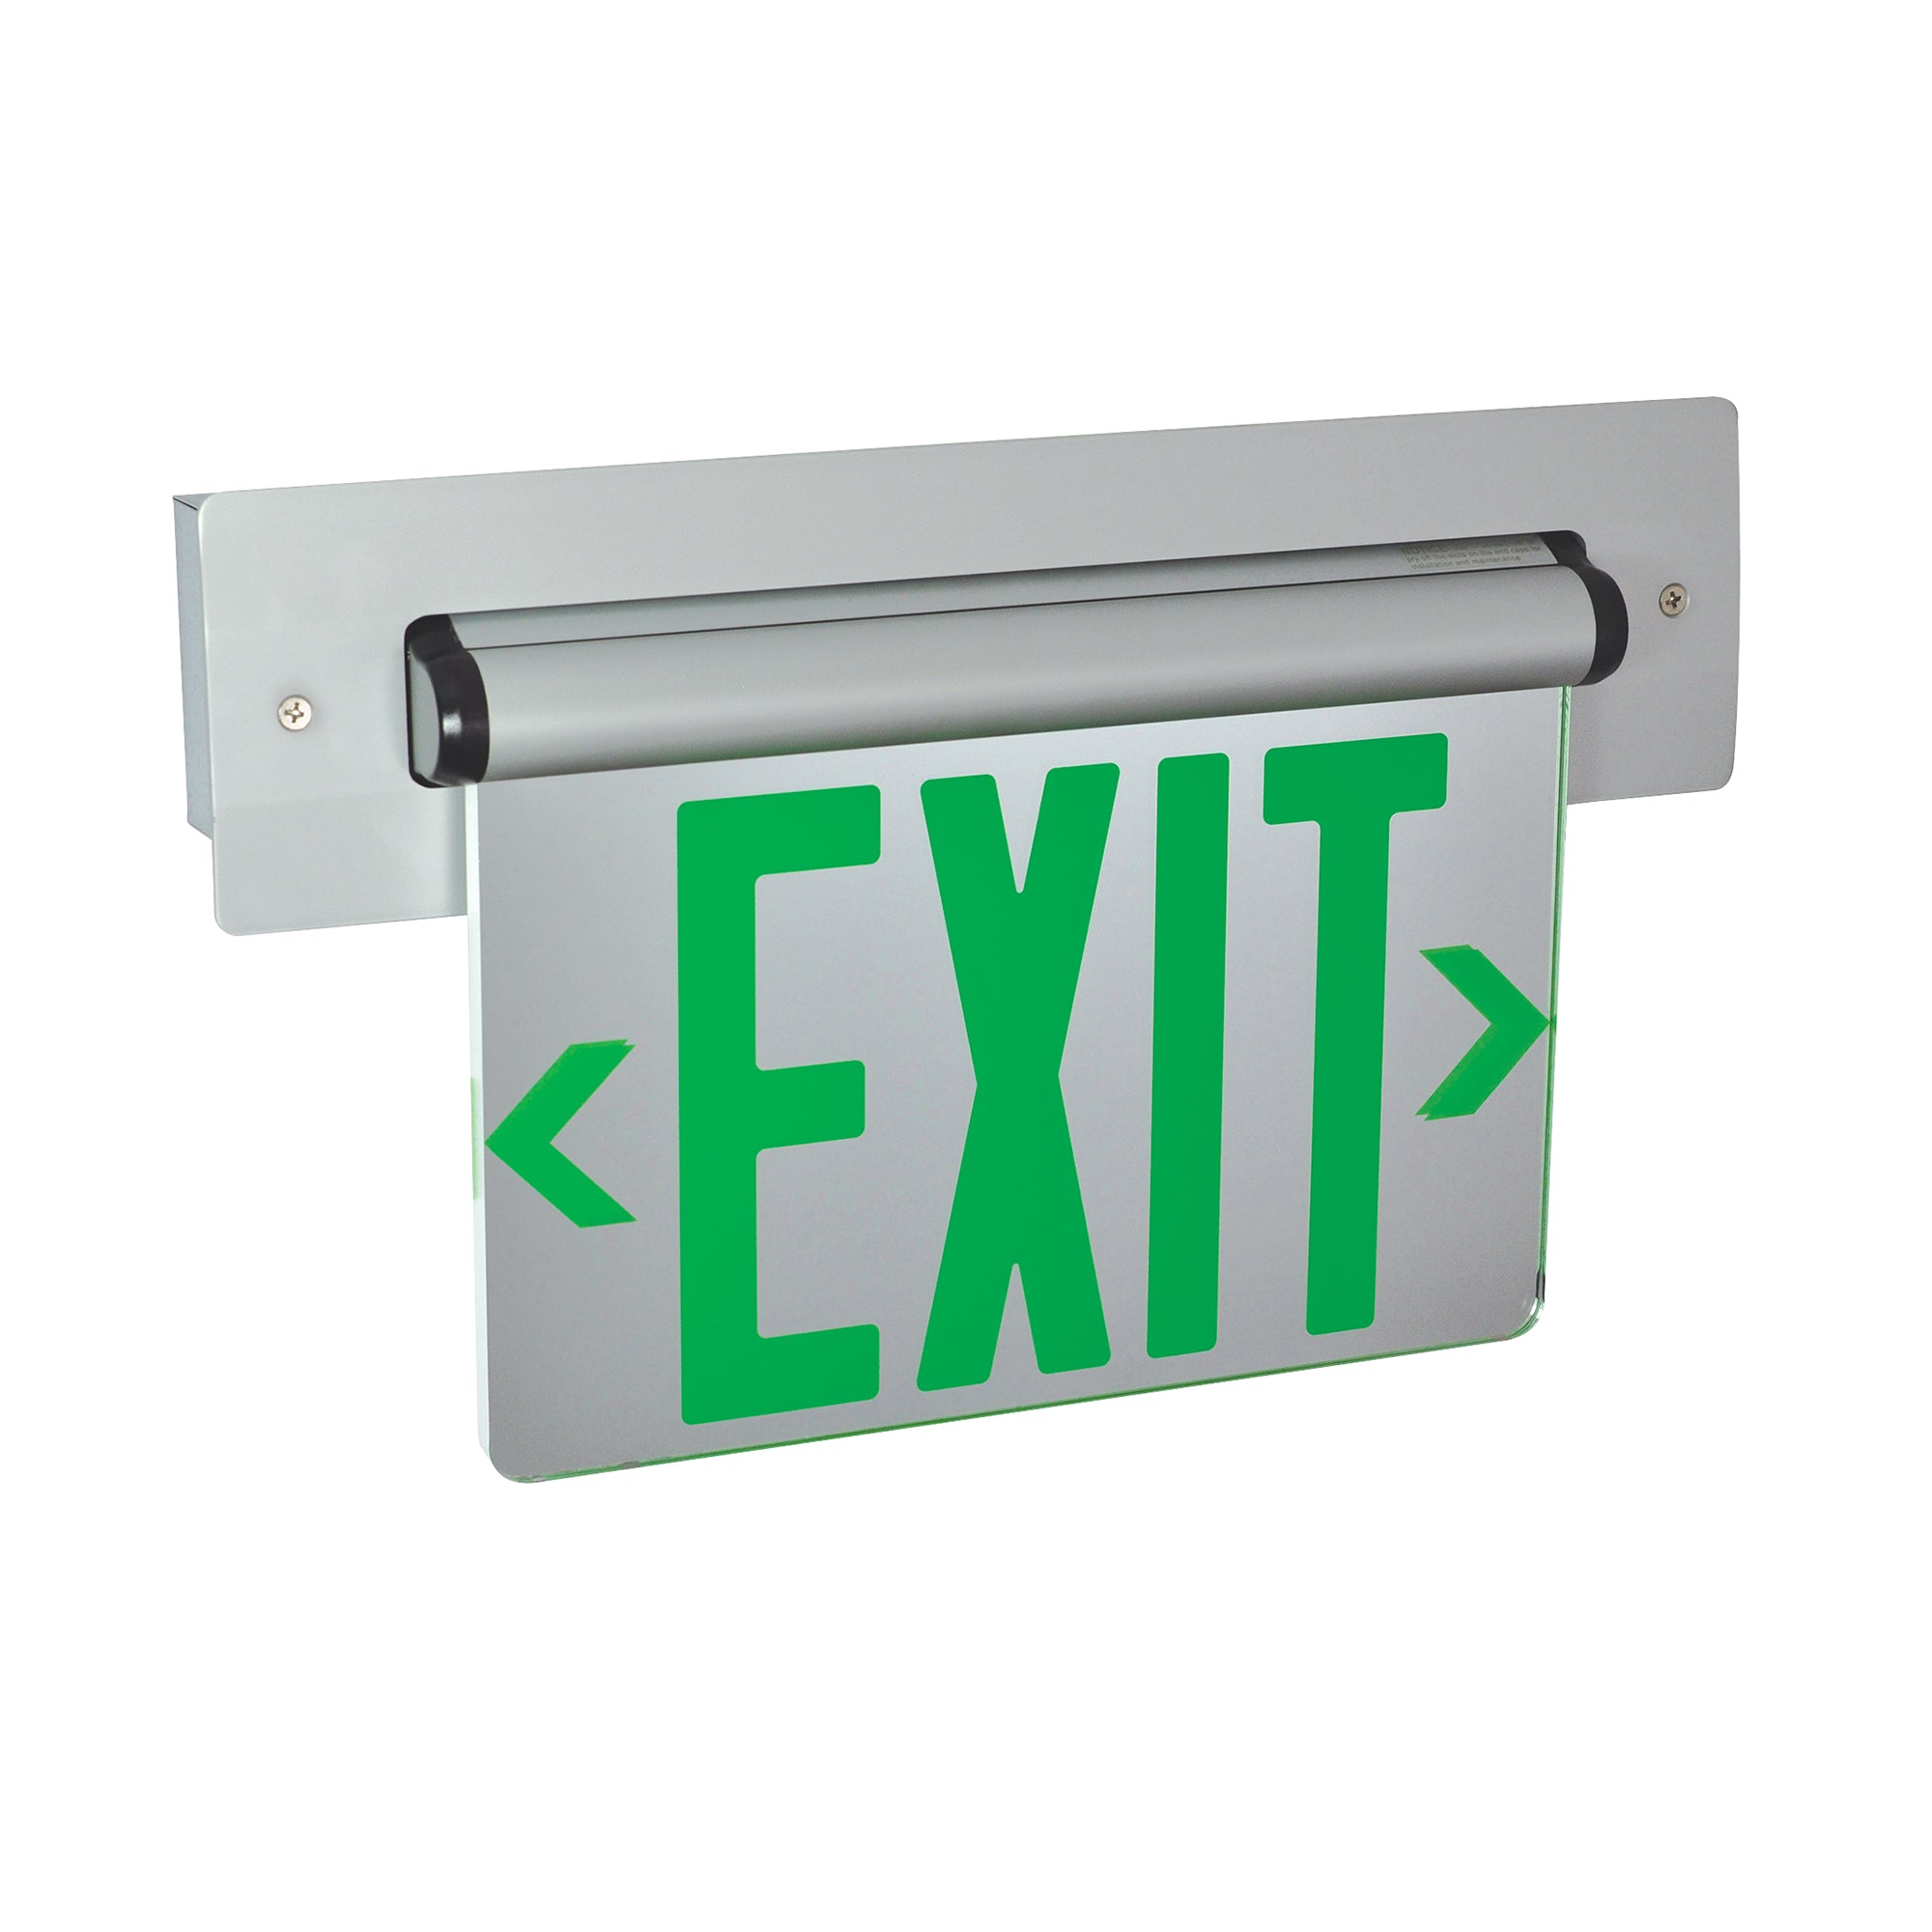 Nora Lighting NX-815-LEDG2MW - Exit / Emergency - Recessed Adjustable LED Edge-Lit Exit Sign, Battery Backupt, 6 Inch Green Letters, Double Face / Mirrored Acrylic, White Housing